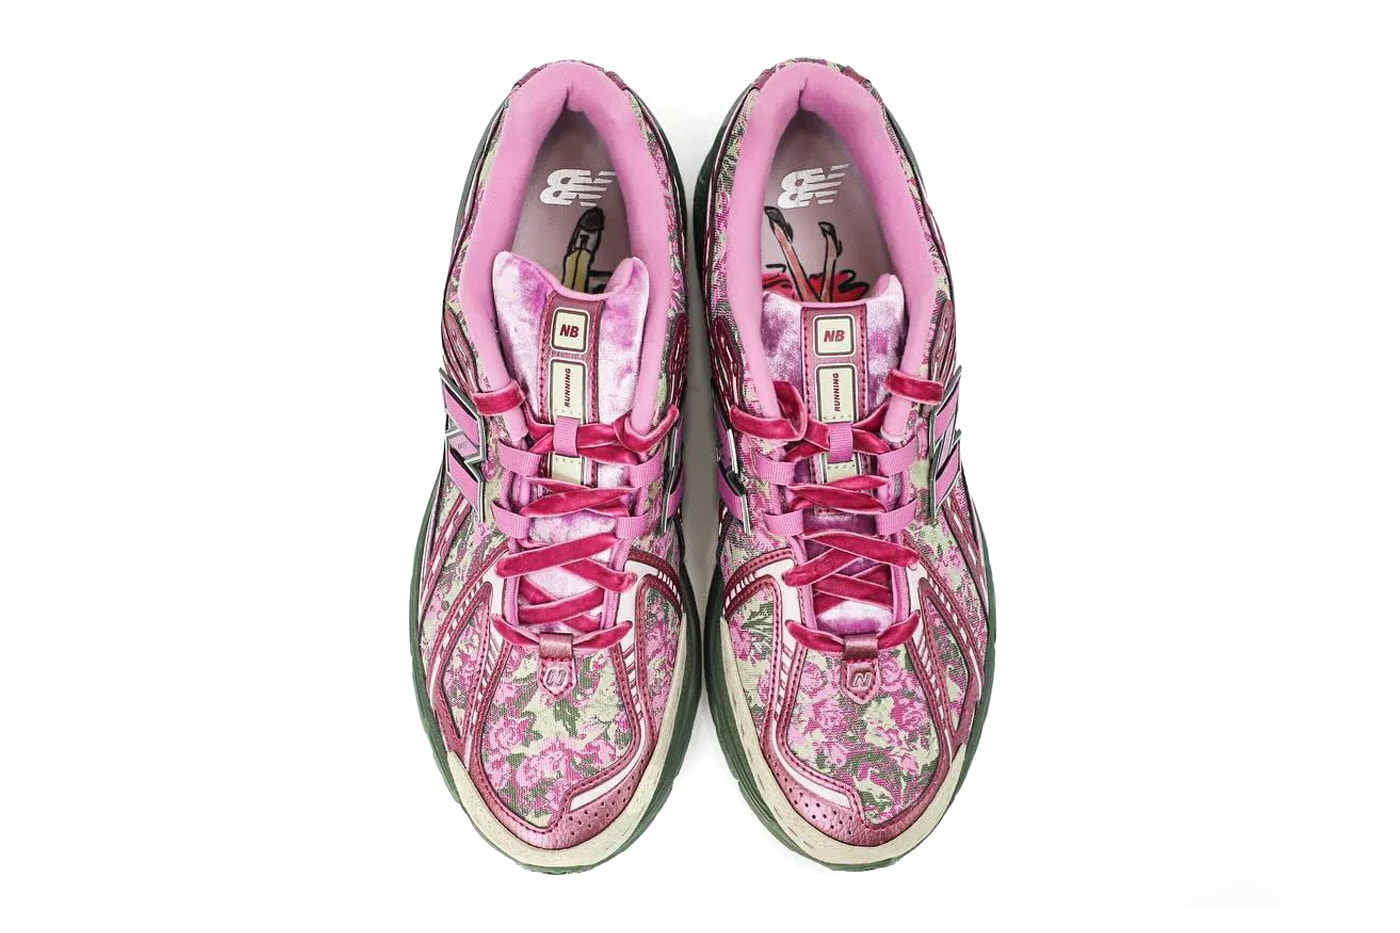 First Look at Inaugural Jack Harlow X New Balance 1906R Collaboration 2024 release date nb 550 green magenta pink floral velvet lacesdetails dynamic 